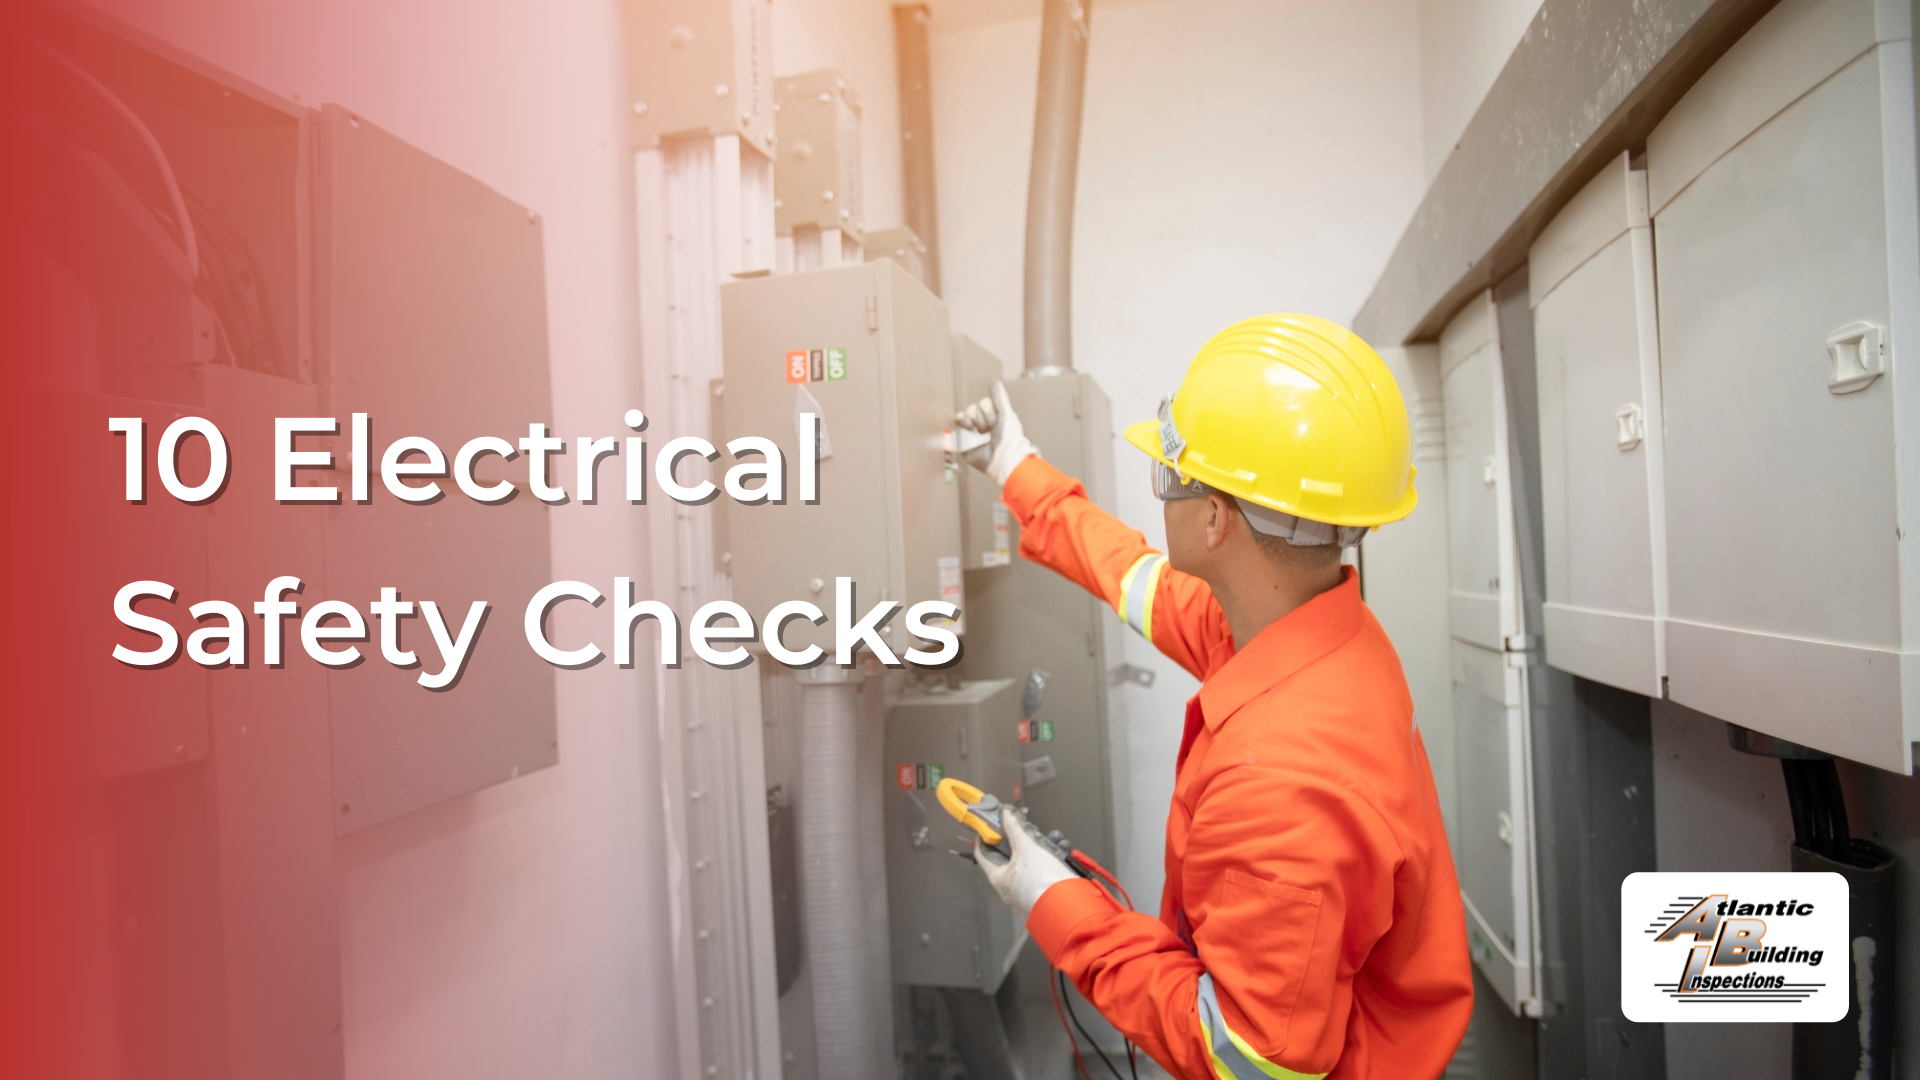 10 Electrical Safety Checks Homeowners Should Do Every Year